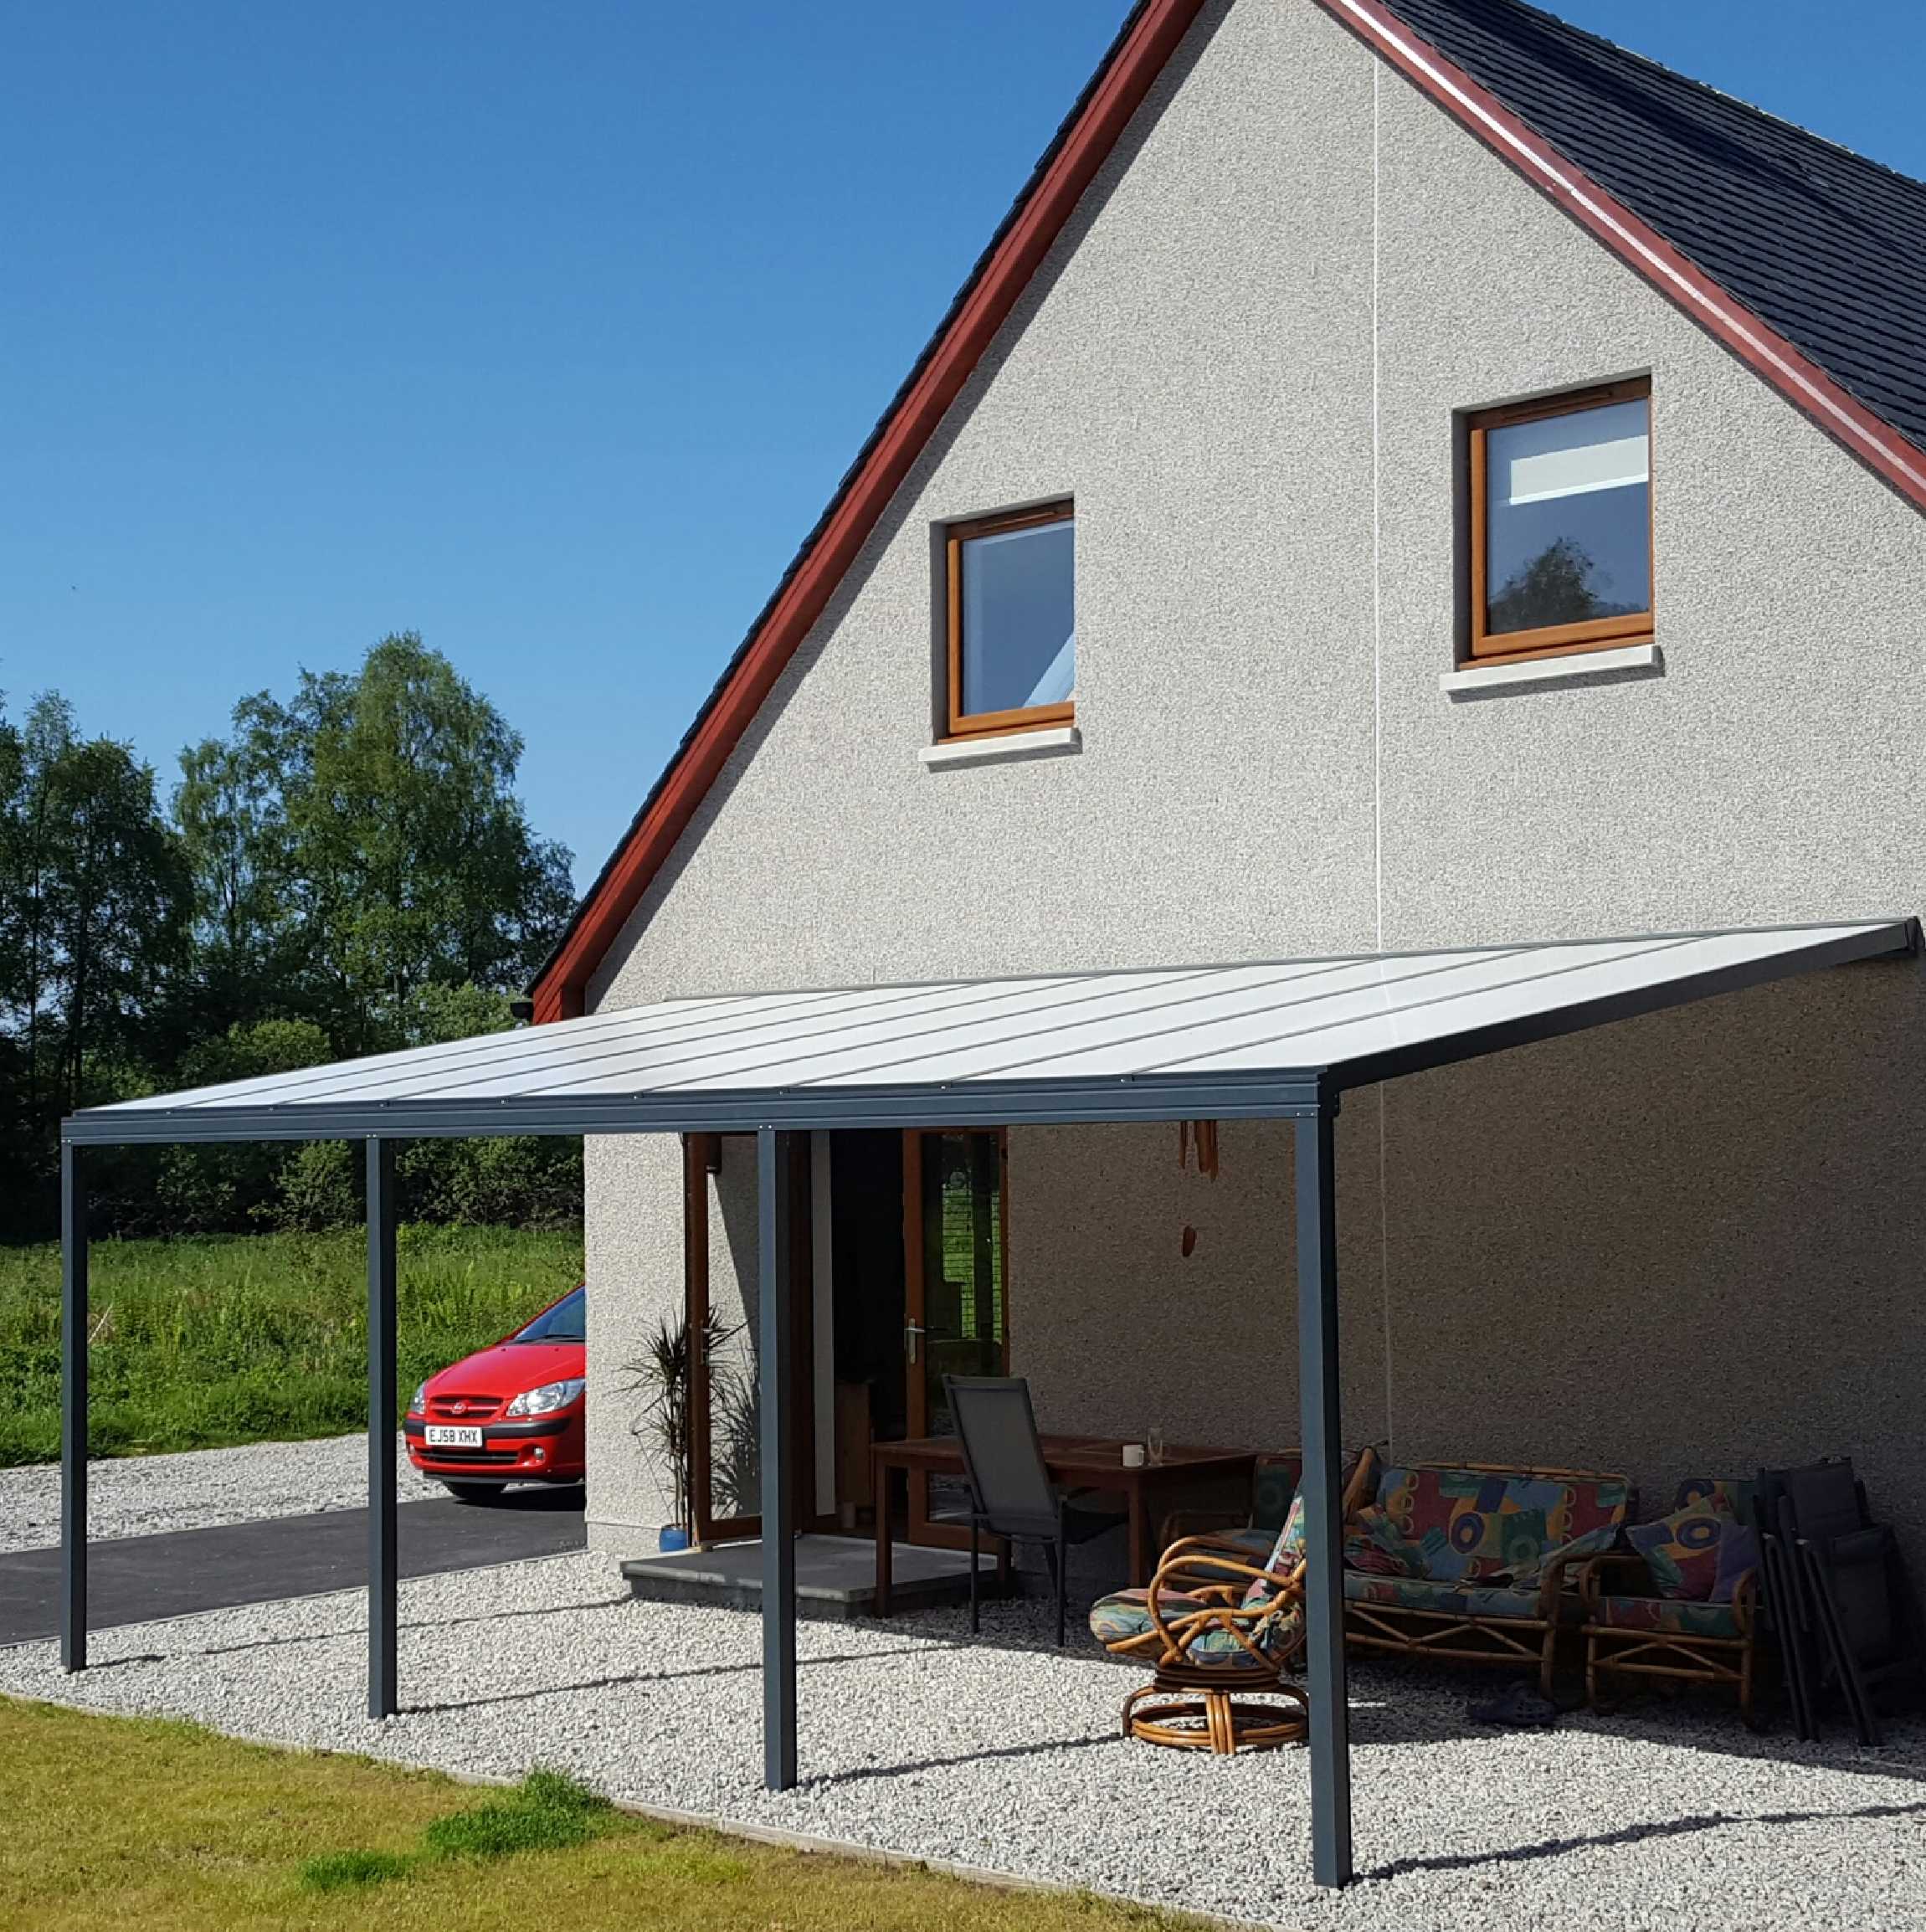 Great selection of Omega Smart Lean-To Canopy, Anthracite Grey, 16mm Polycarbonate Glazing - 6.0m (W) x 2.0m (P), (3) Supporting Posts